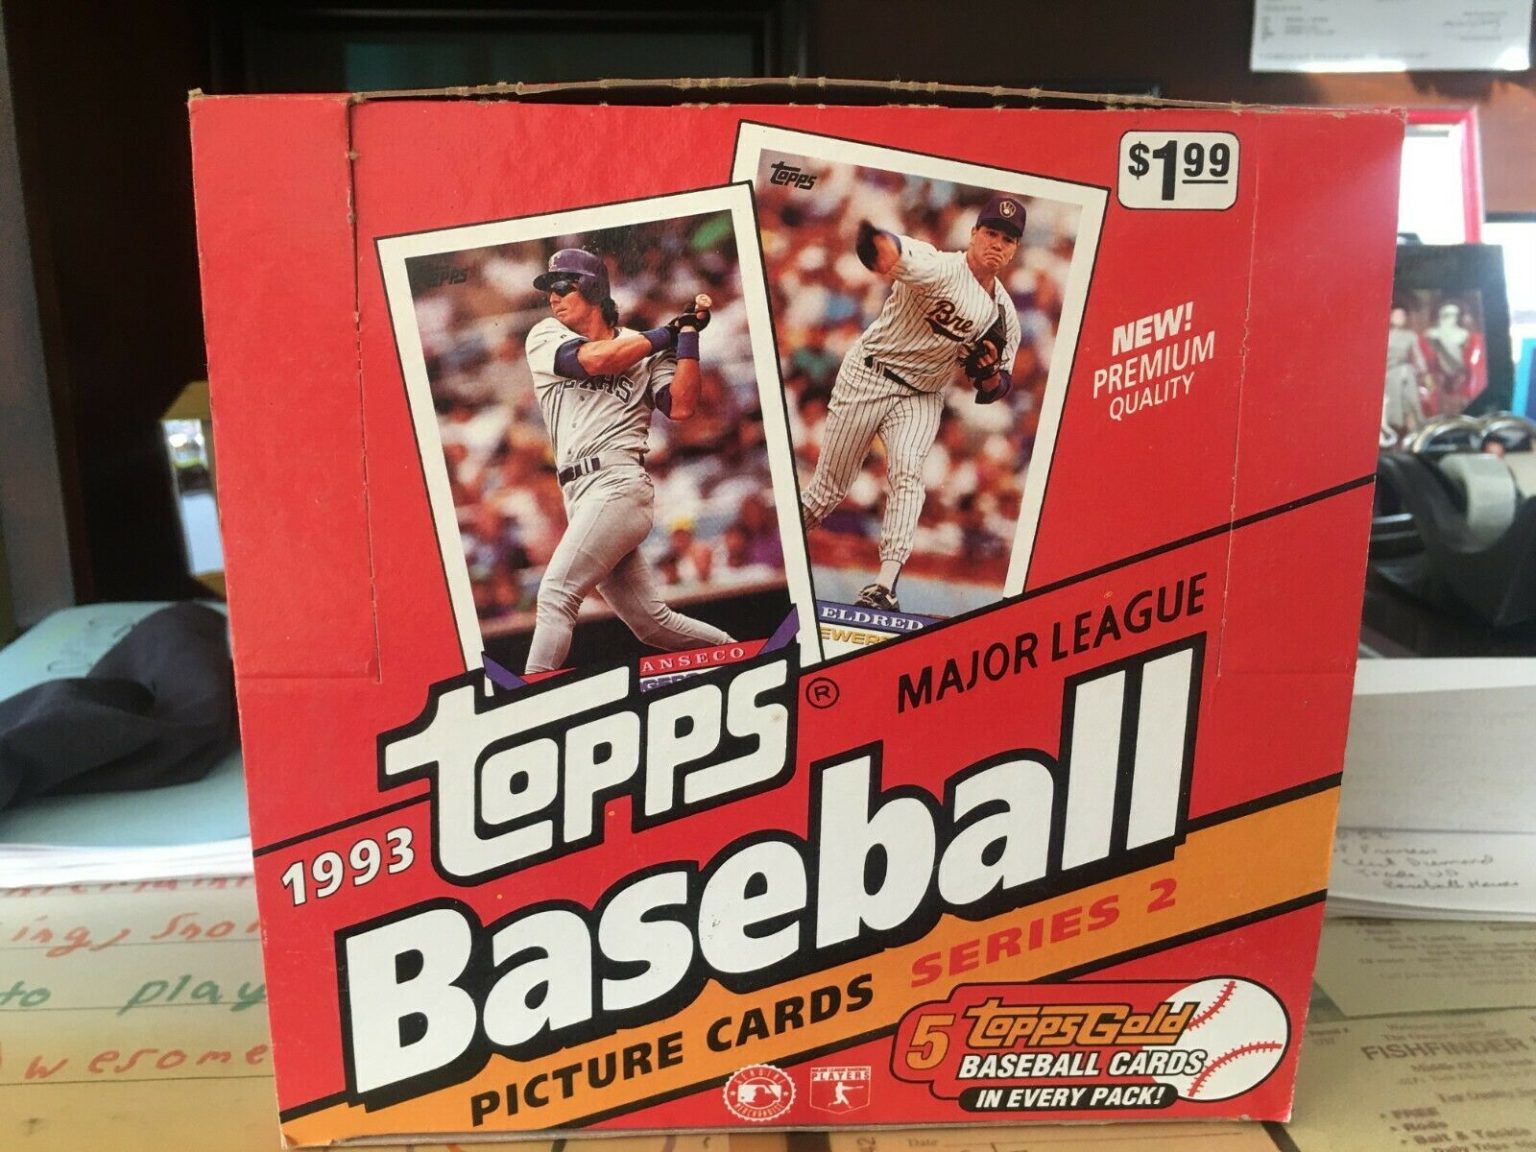 1993 Topps Baseball Vintage Trading Cards Series 2 7 Factory Sealed